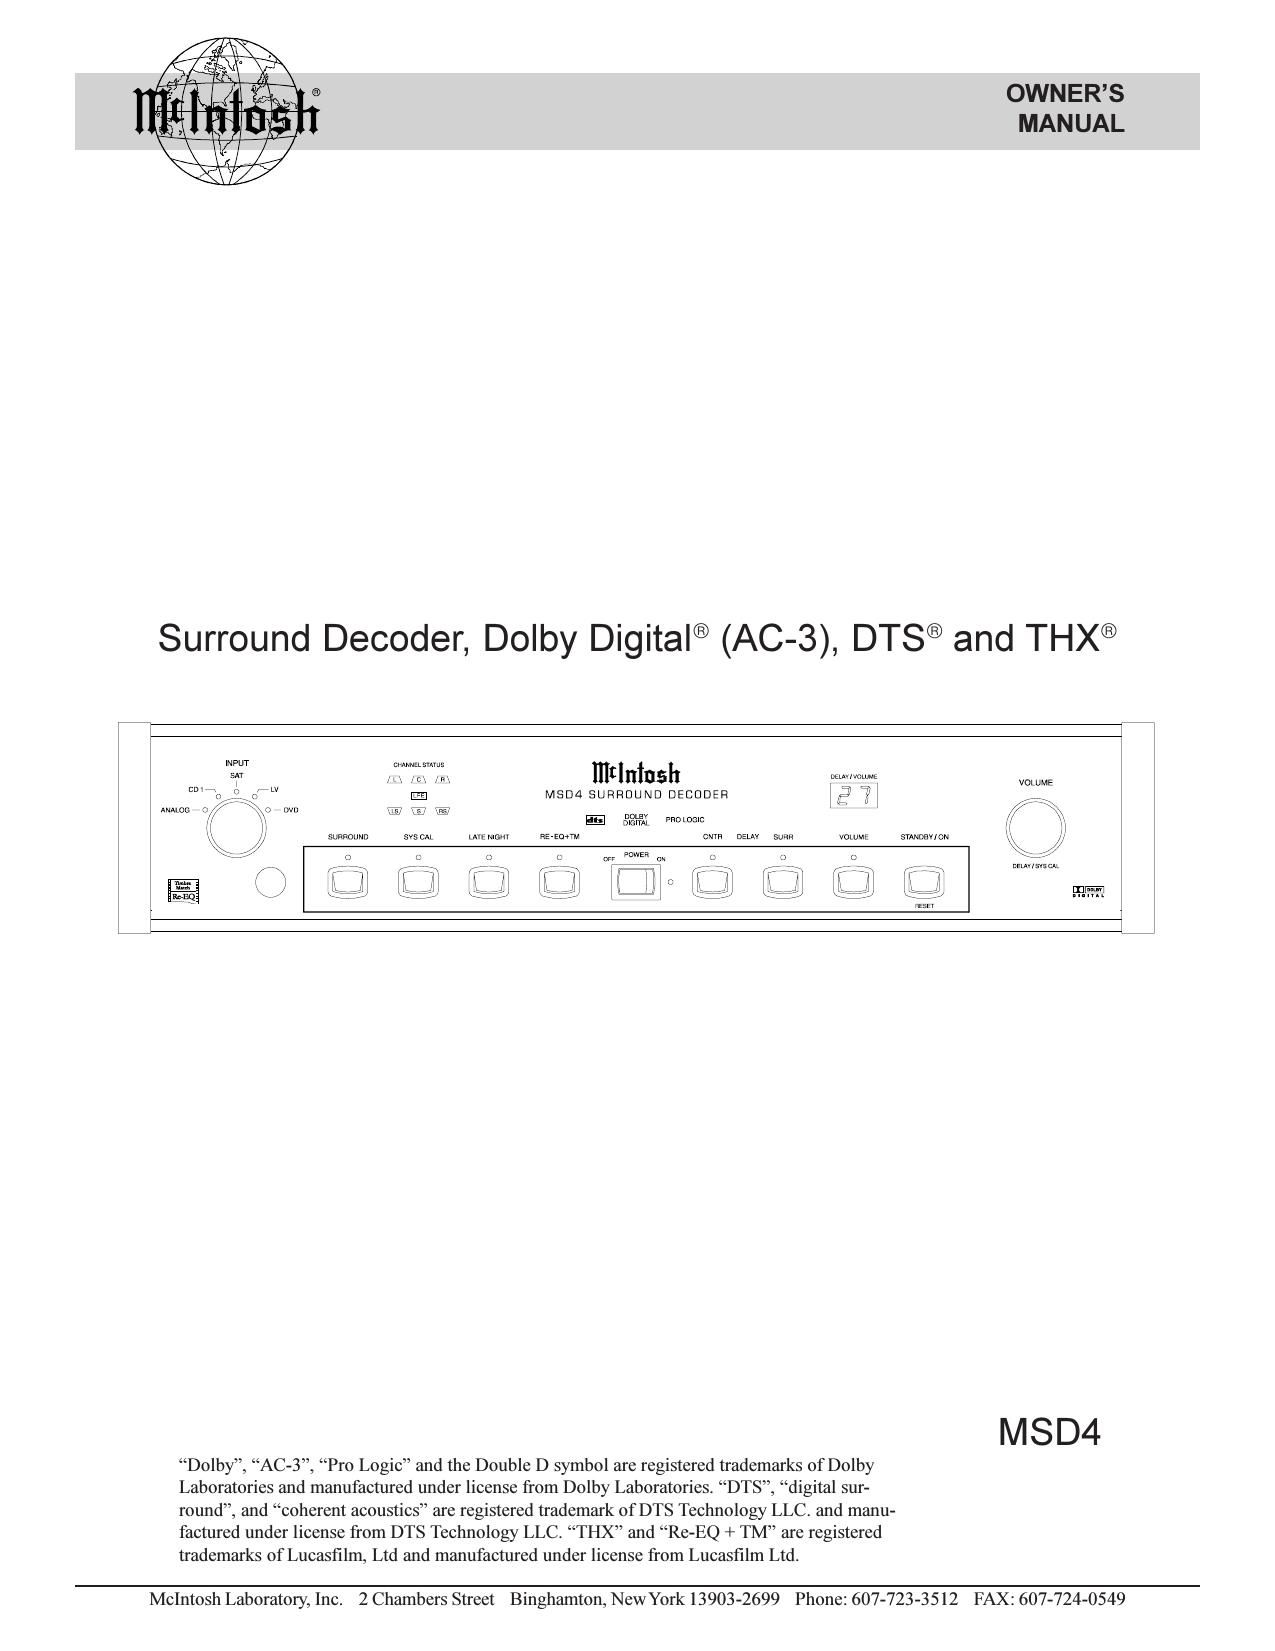 McIntosh MSD 4 Owners Manual